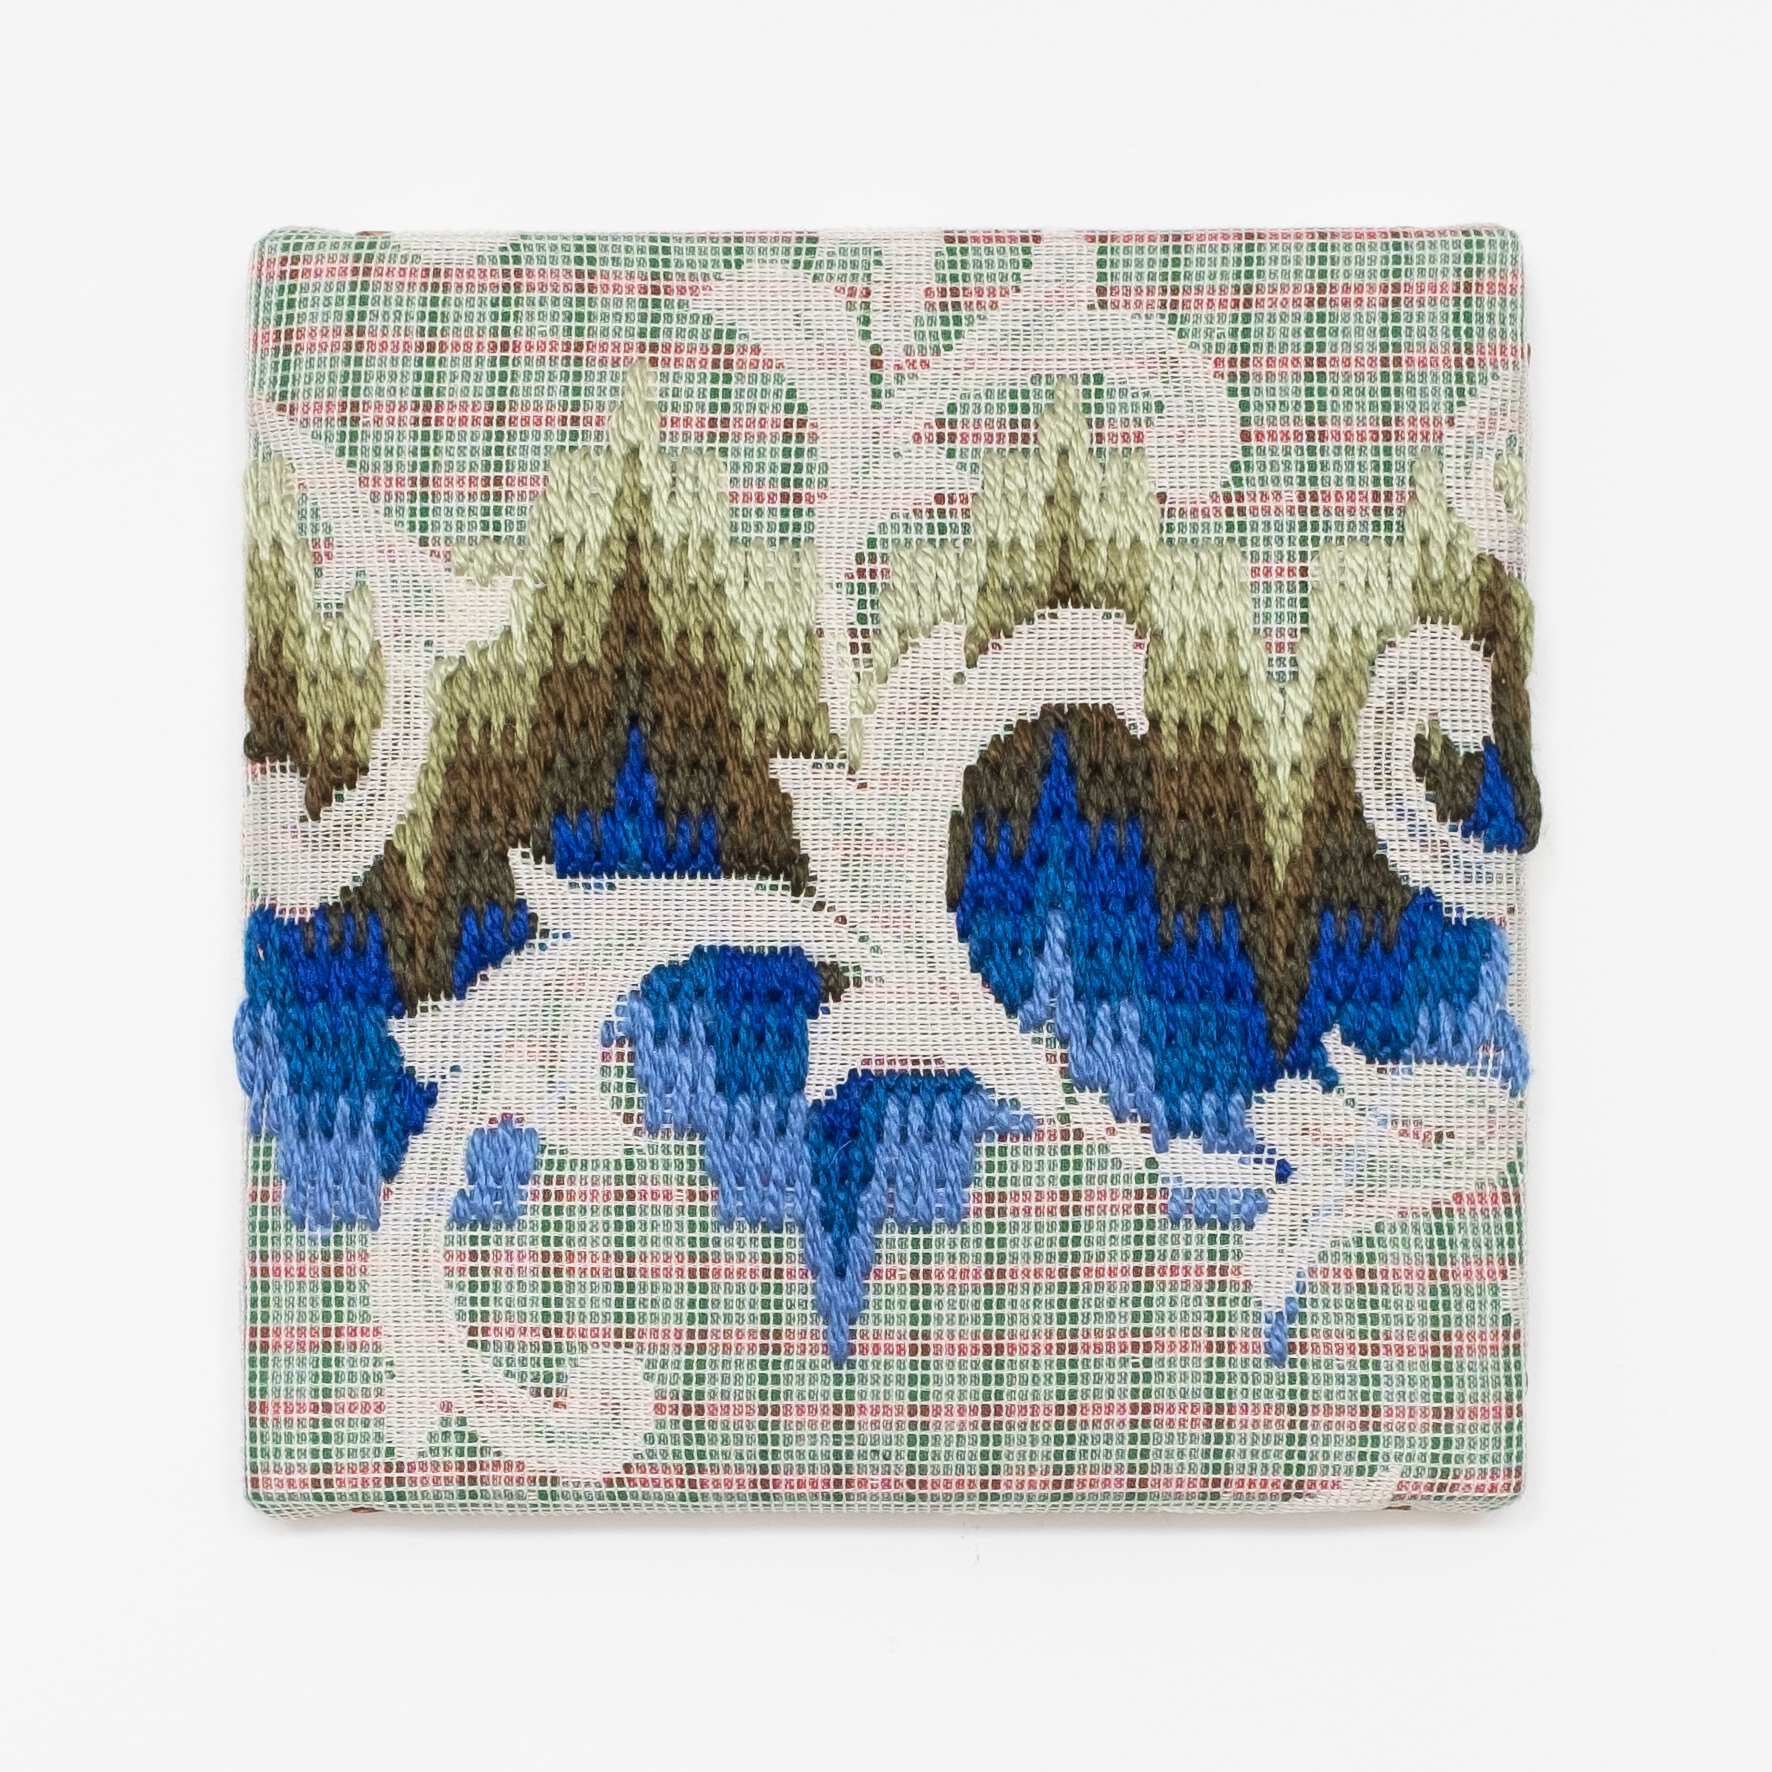 Triple-layer gather-gusset [green-blue northern lights], Hand-embroidered silk on lace over fabric, 2019